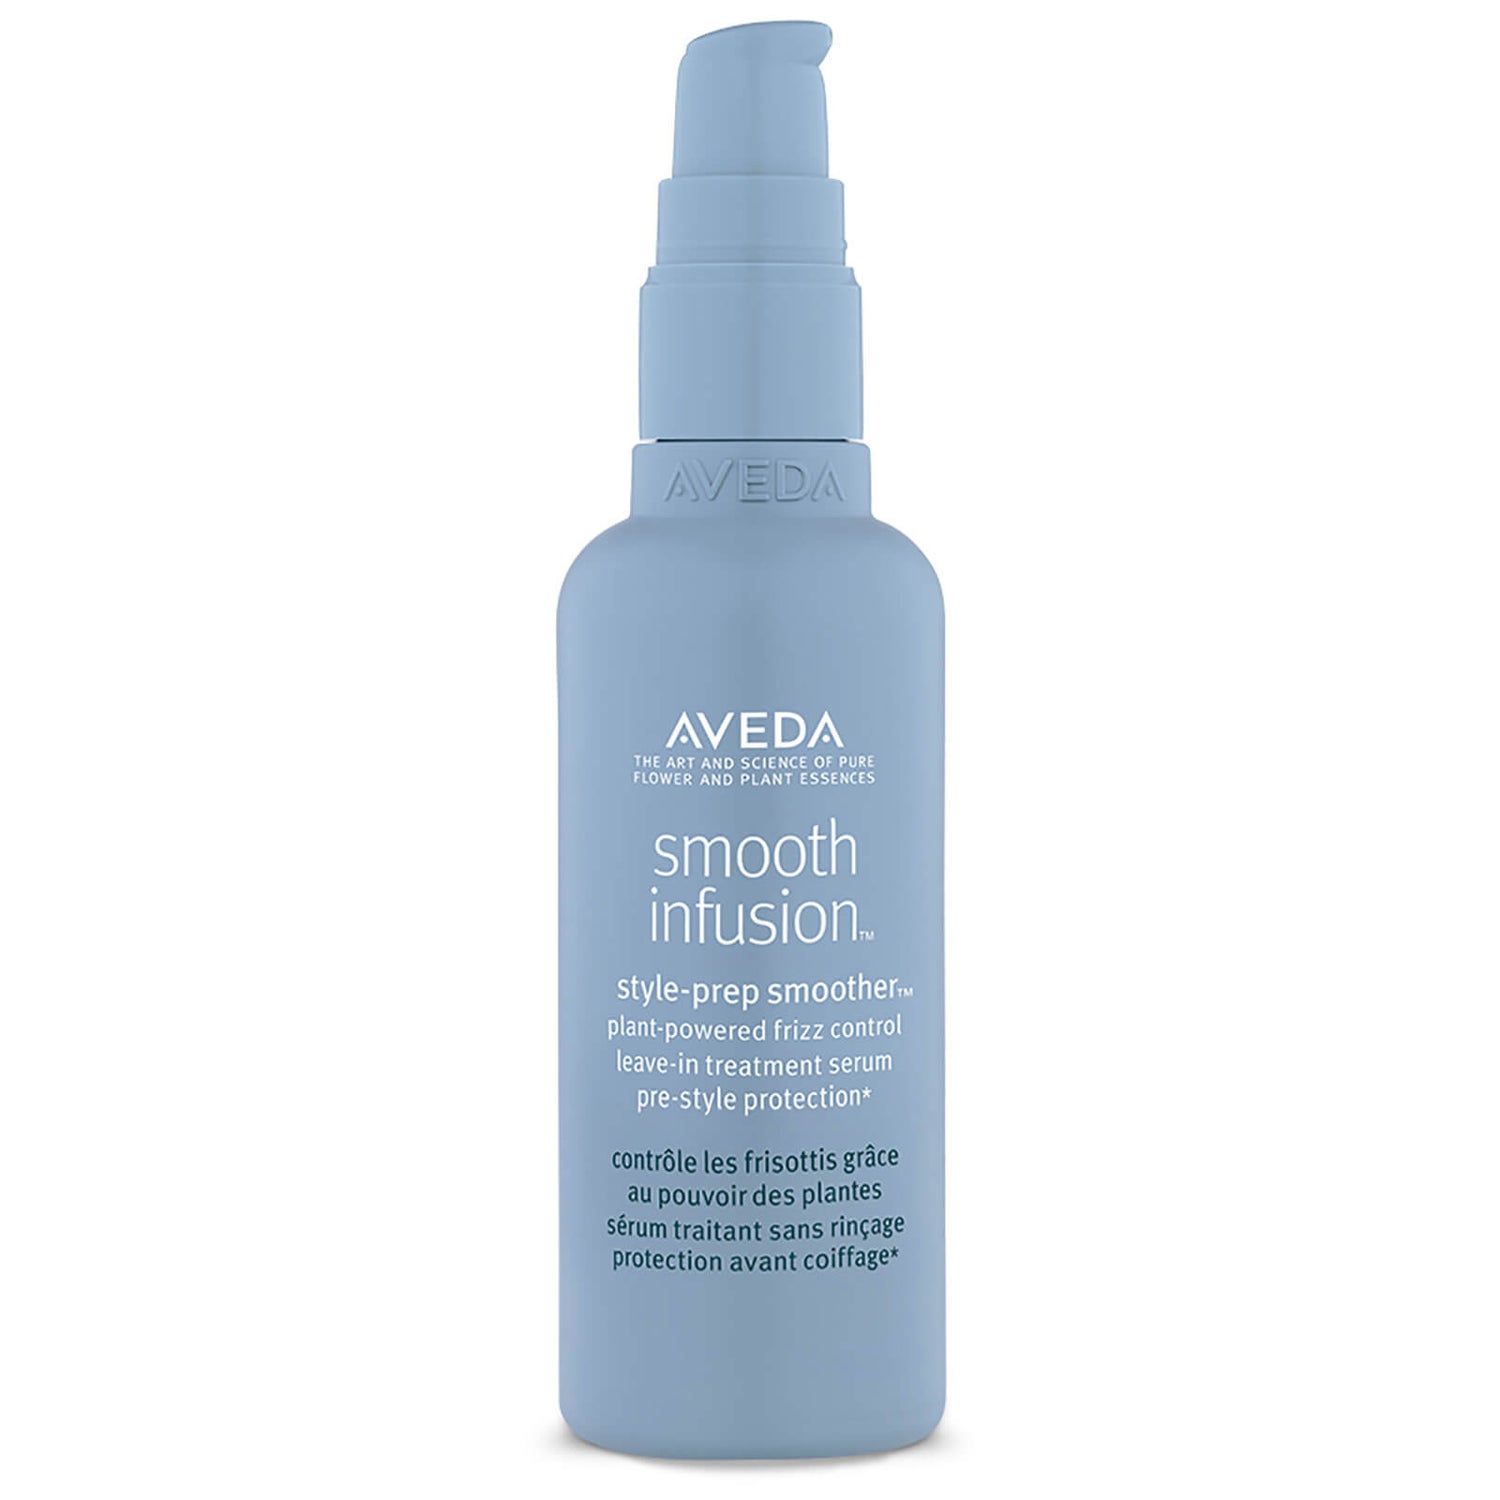 Aveda Smooth Infusion Style-Prep Aveda Smoother 100ml